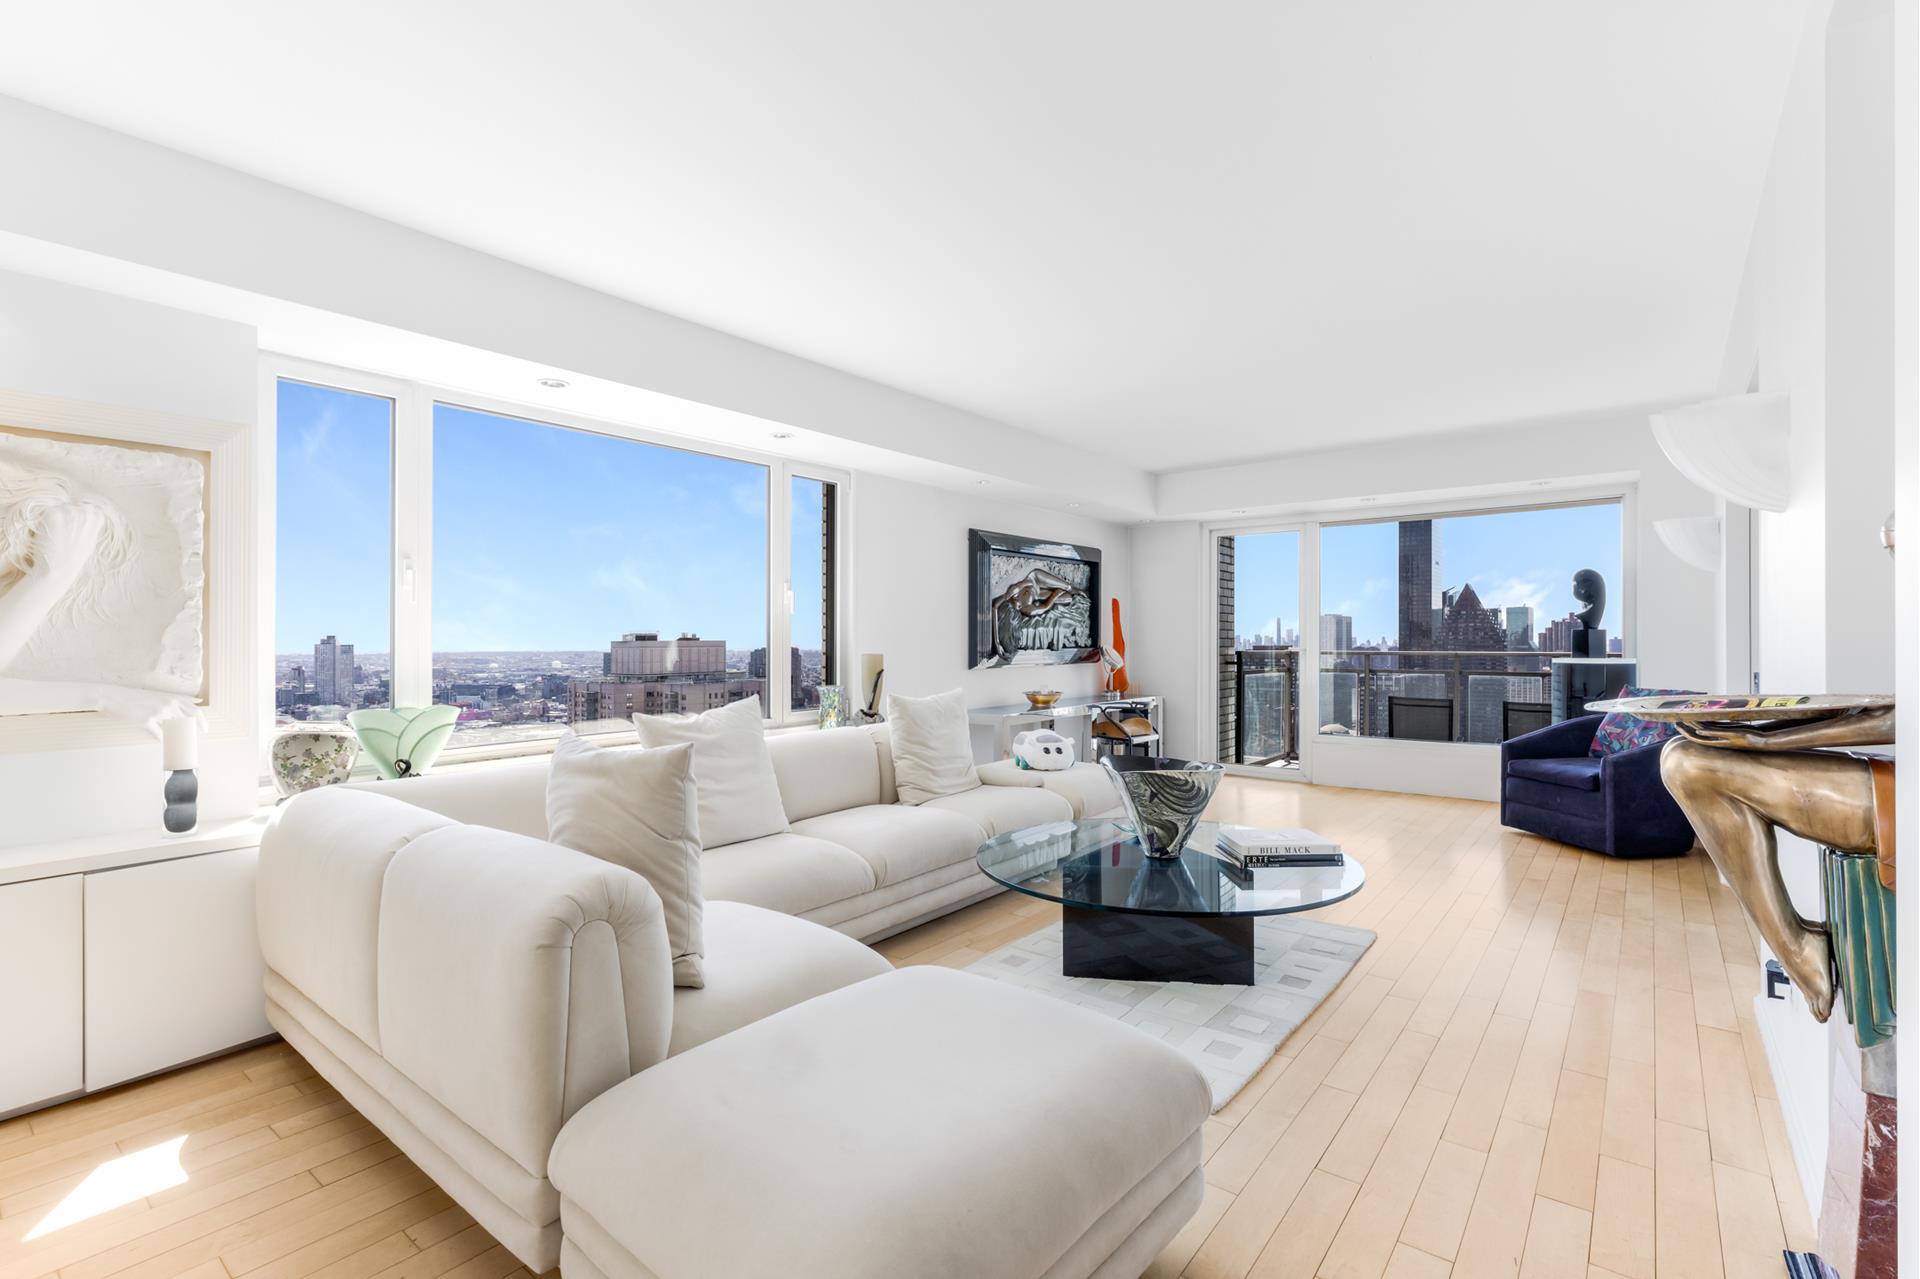 303 East 57th Street 41A, Sutton, Midtown East, NYC - 2 Bedrooms  
3 Bathrooms  
5 Rooms - 